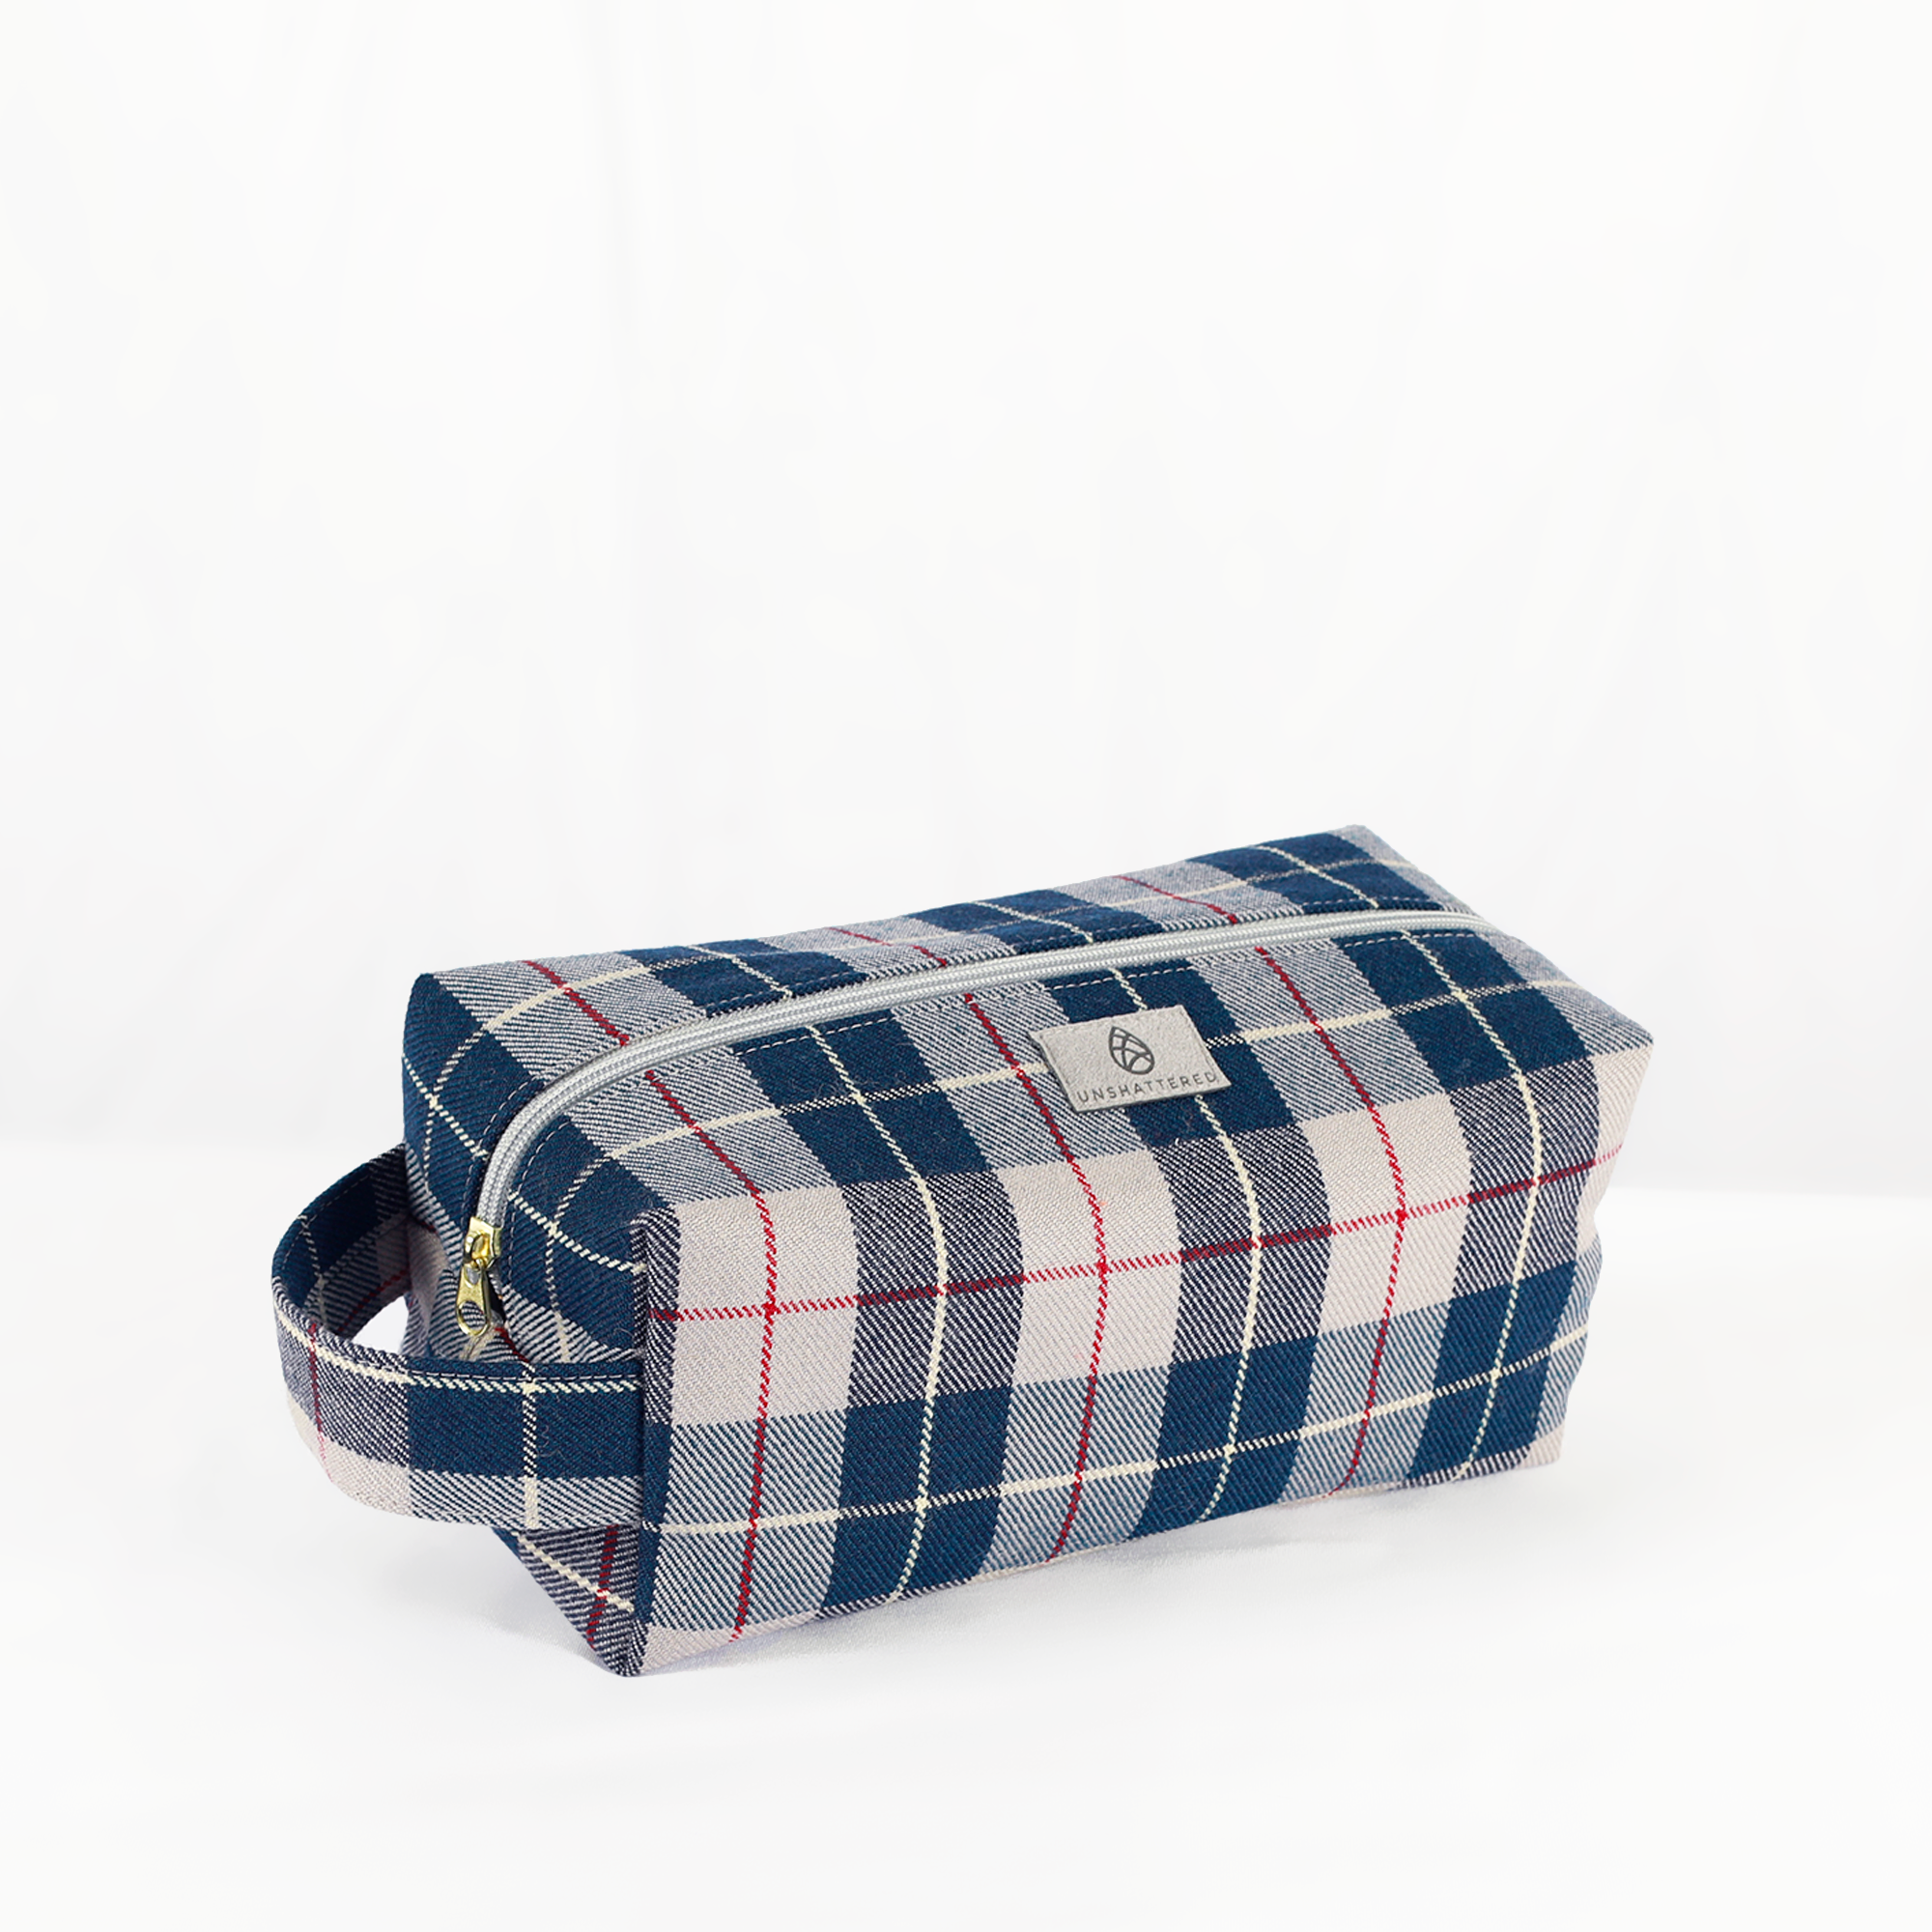 Toiletry Kit from Vintage Blue-Grey Plaid Mercedes-Benz Interior